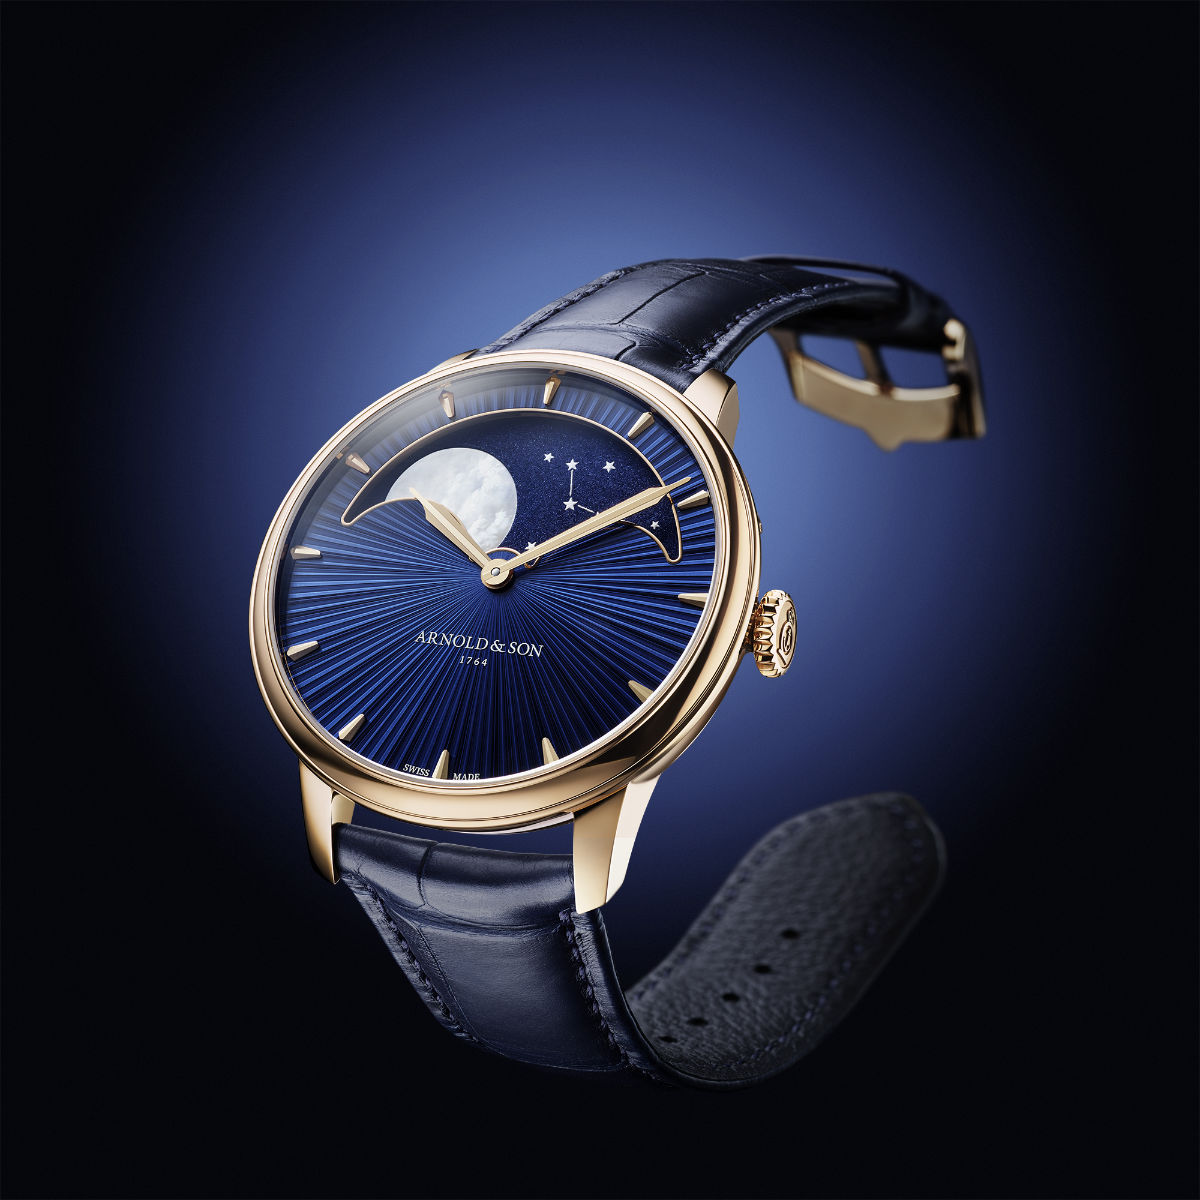 Arnold & Son Presents Its New Watches Perpetual Moon 41.5 Red Gold & Perpetual Moon 41.5 Platinum